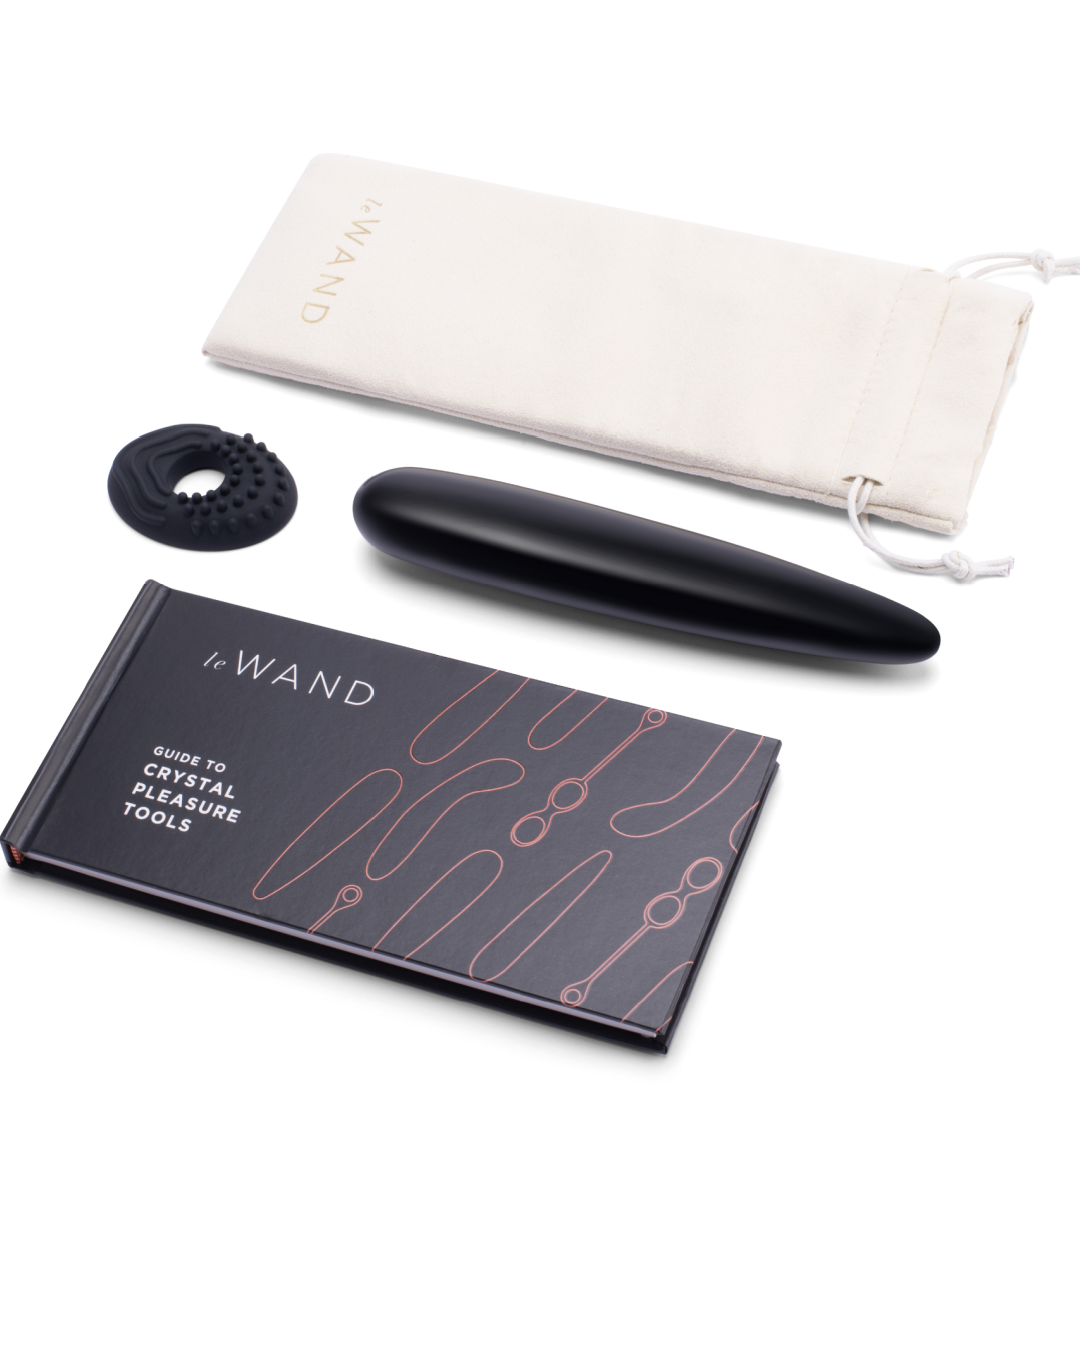 Le Wand Crystal Wand - Black Obsidian pictured next to silicone ring, storage pouch and user manual 